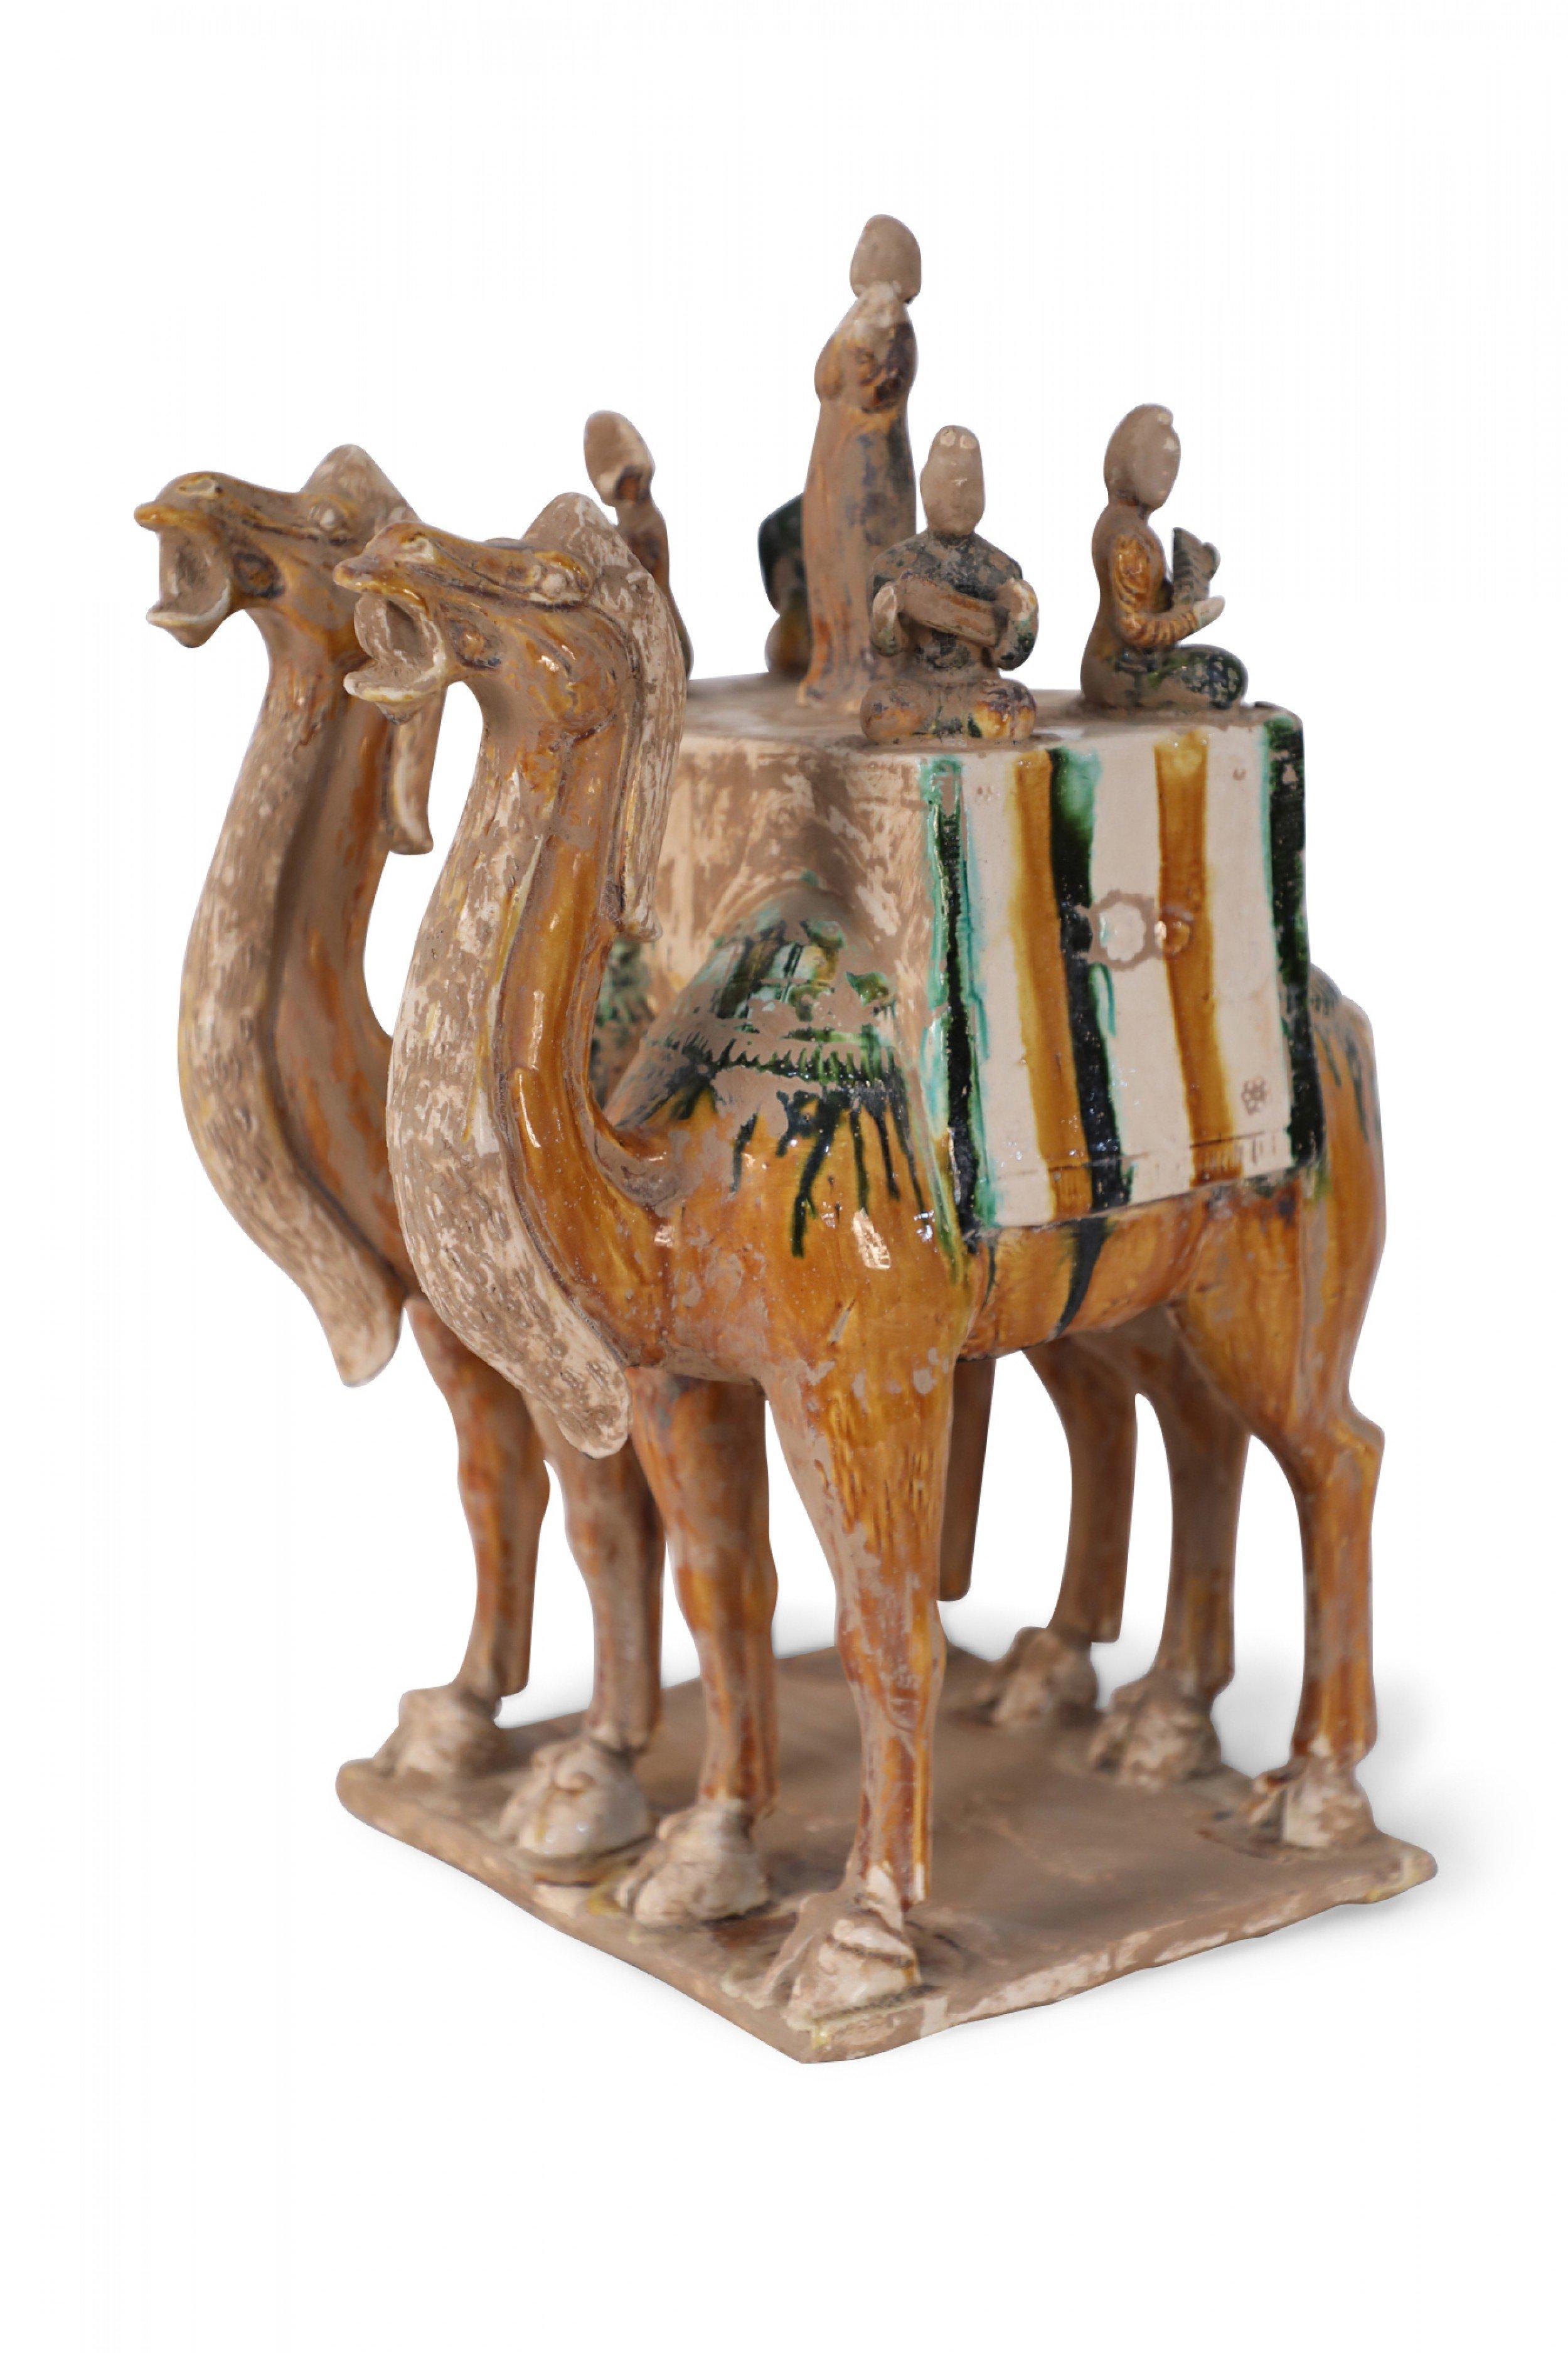 Antique Chinese Tang Dynasty-style terra cotta tomb figure of two camels carrying a band of five musicians - four seated with instruments, and one central figure standing to sing. The figure is crafted with the Tang Dynasty's traditional tri-color